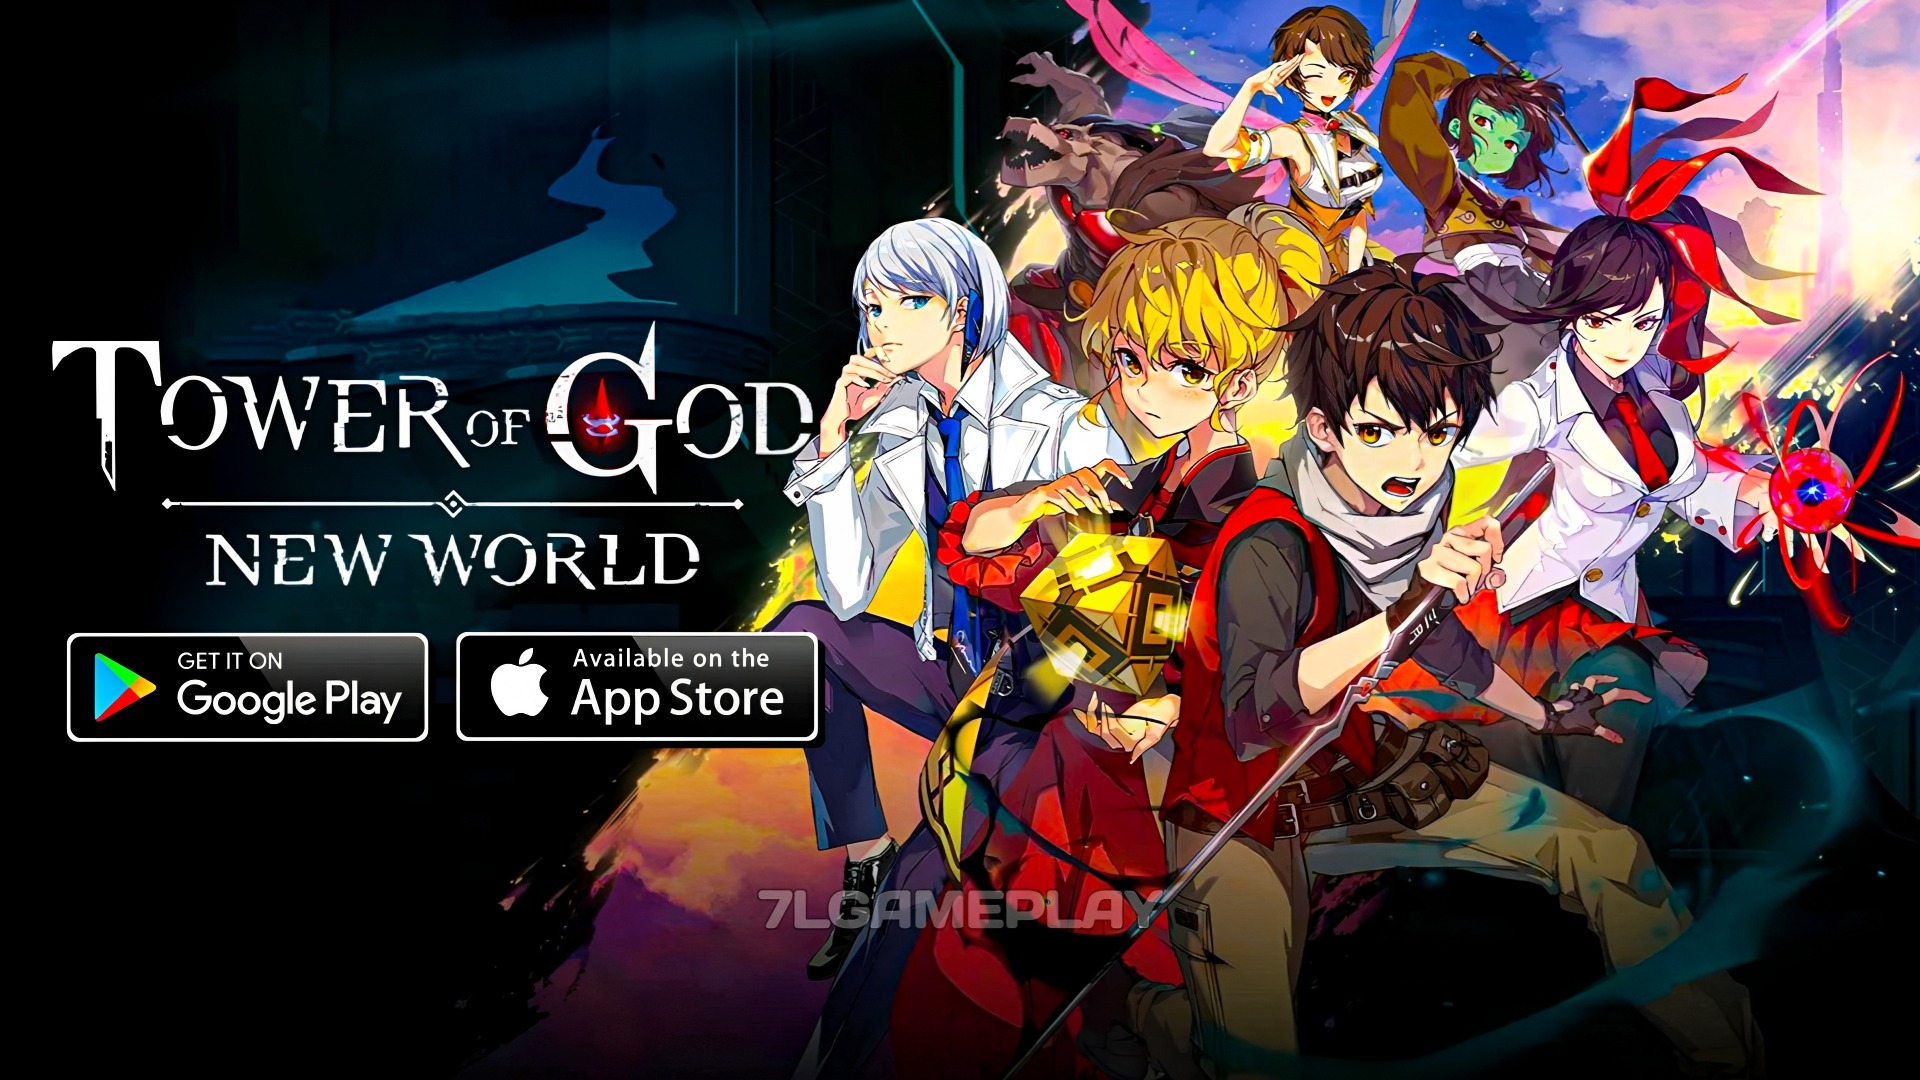 Tower of God: Great Journey - Apps on Google Play